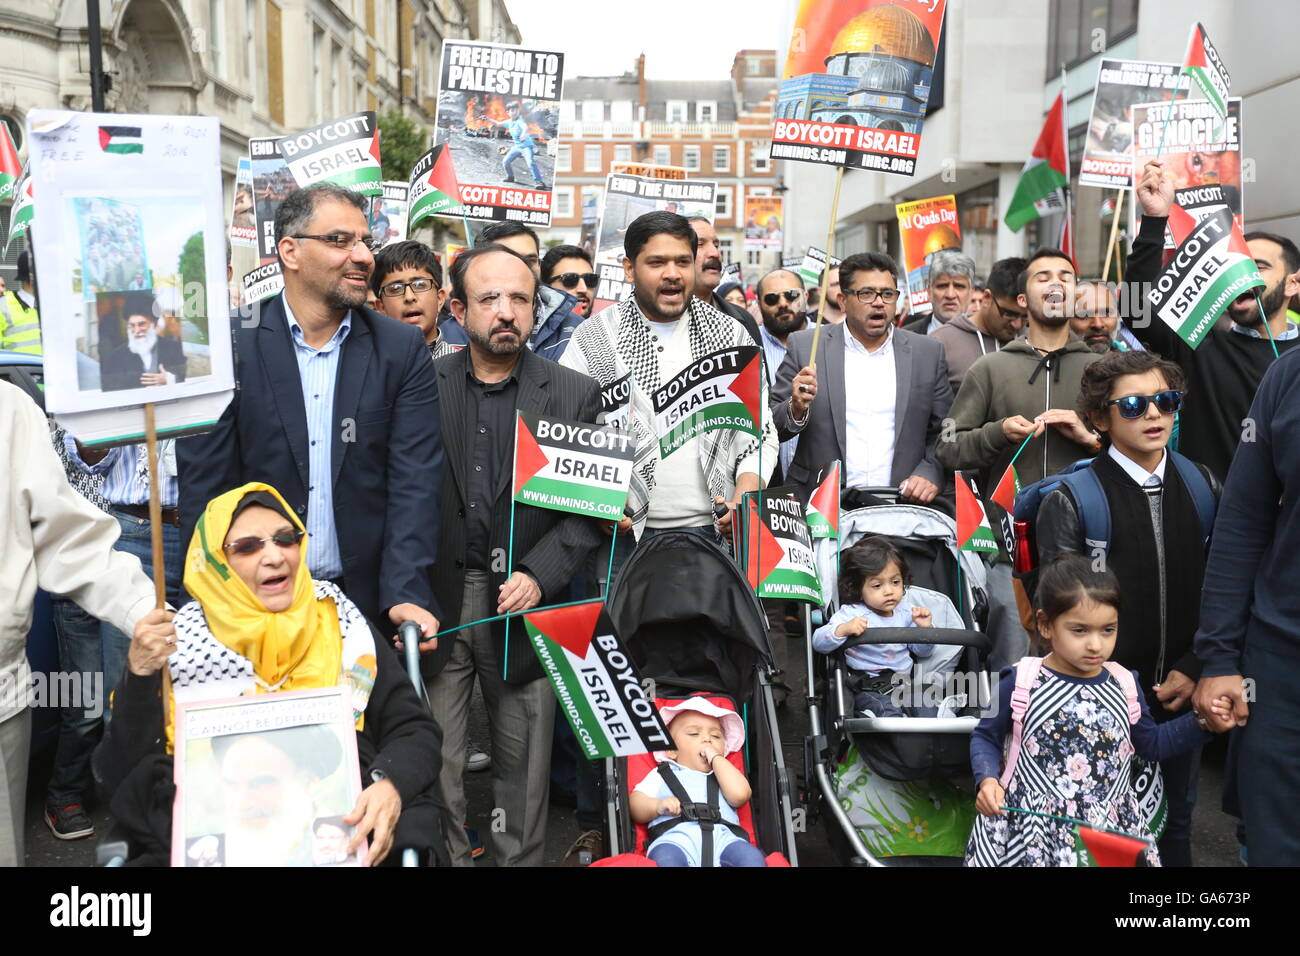 Pro-Palestinian supporters take part in a rally in central London, to commemorate Al-Quds Day, a day that has been marked globally since being inaugurated in 1979 by Ayatollah Khomeini who asked for the last Friday in the Islamic holy month of Ramadan to be set aside as a day for uniting against Israel and showing support for Palestinians. Stock Photo